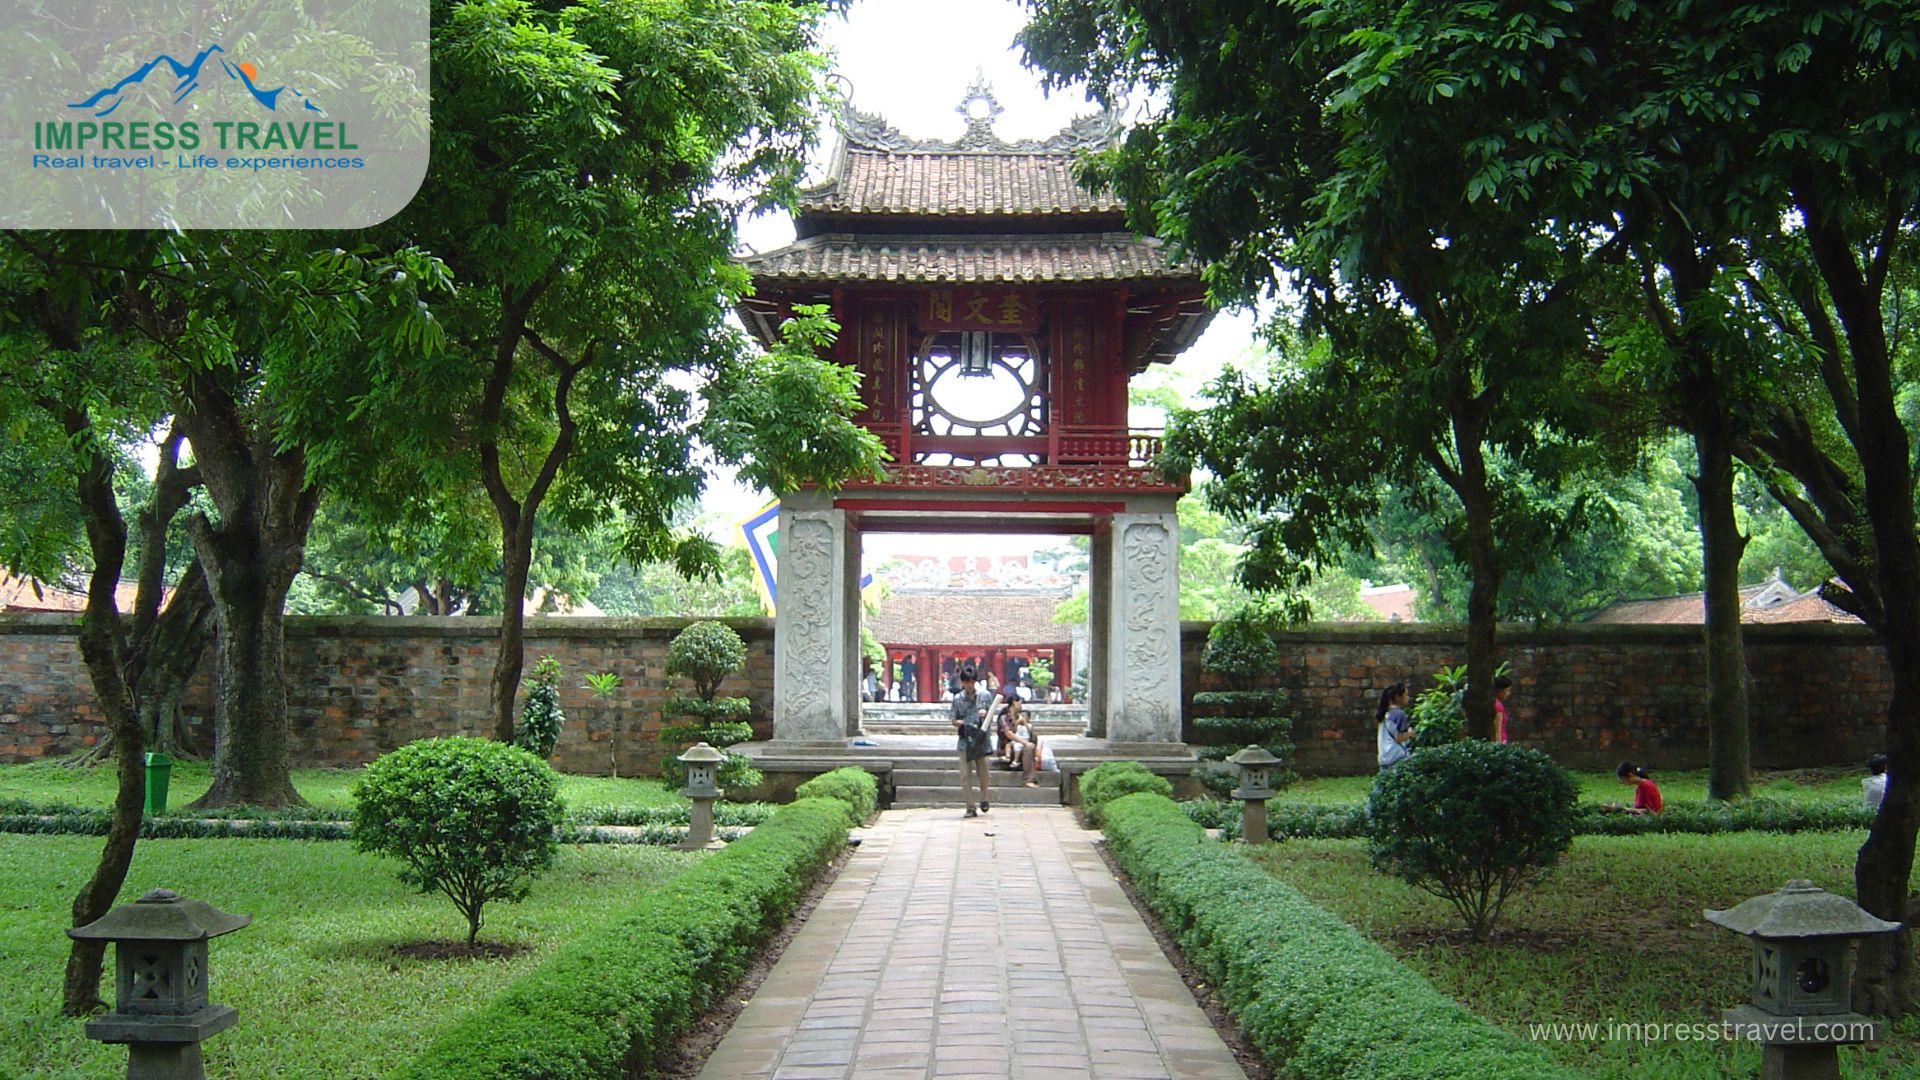 Hanoi location-Built in 1070 during the Ly dynasty, the temple is dedicated to Confucius and honors scholars and academics